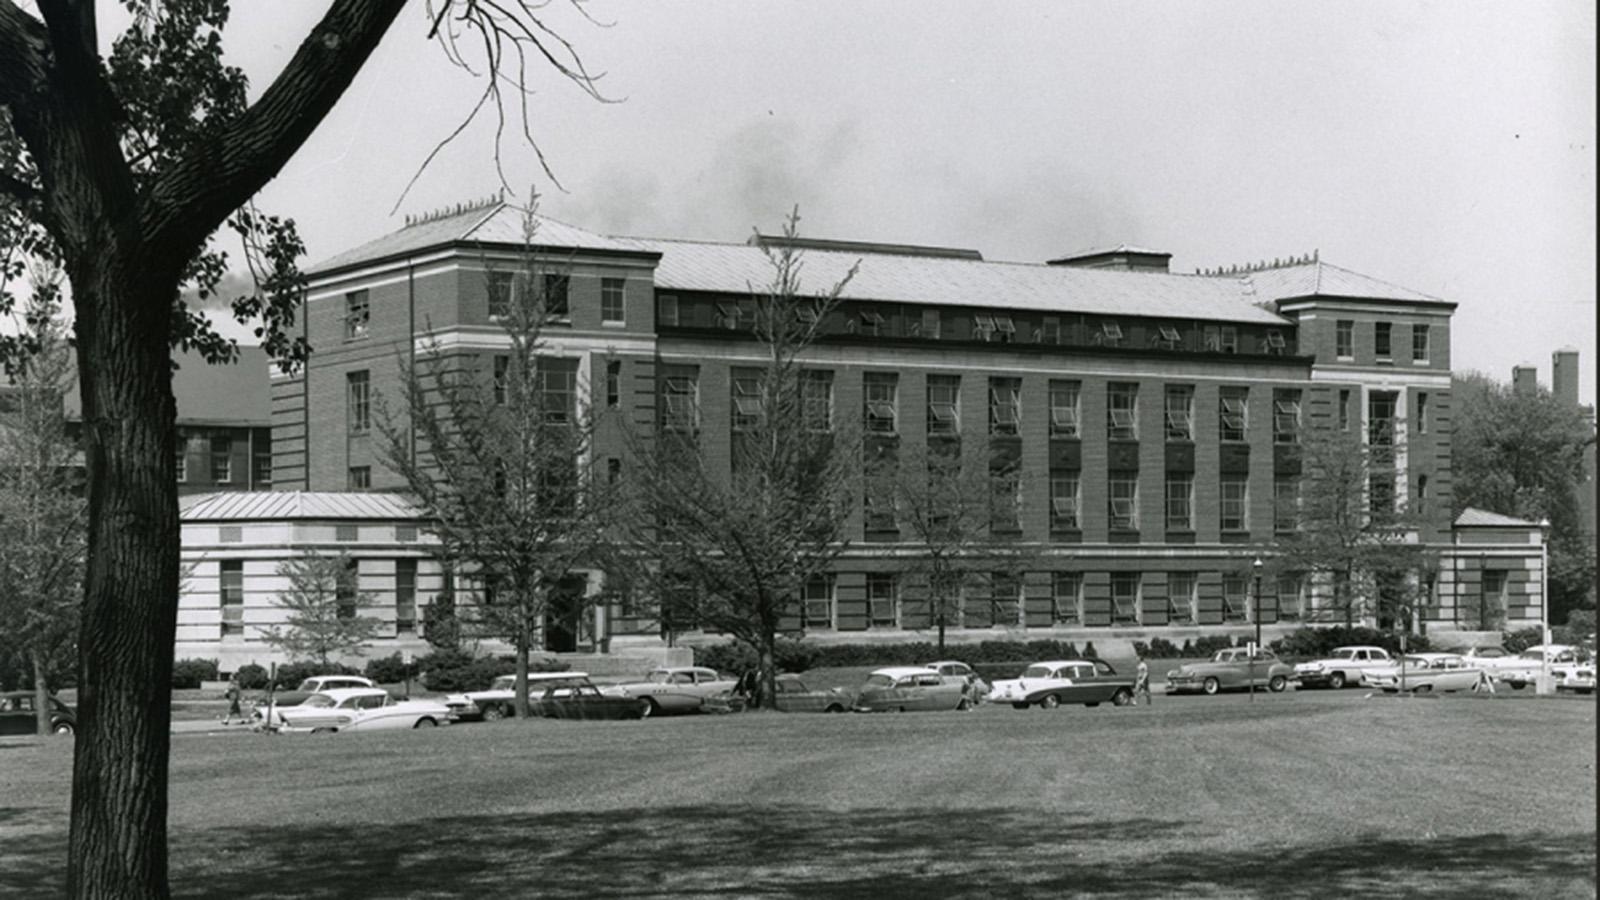 Hughes Hall in the 1960s